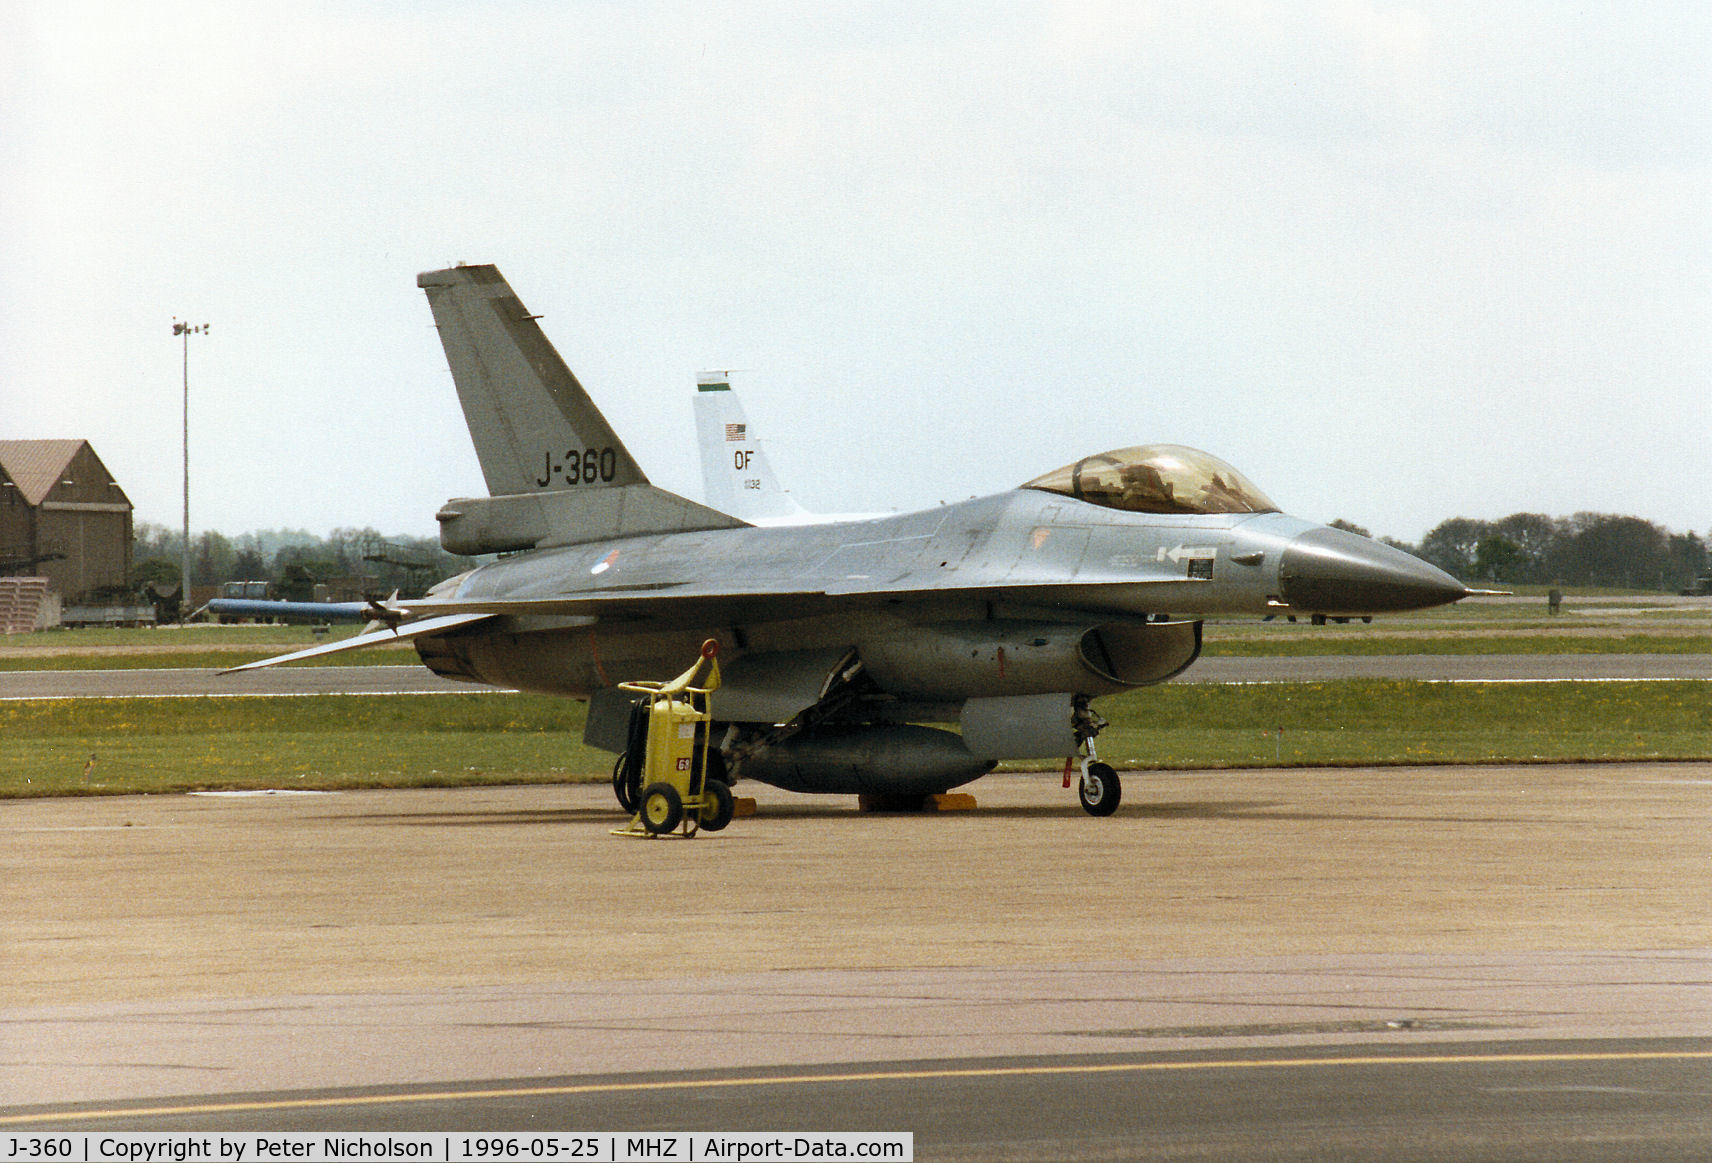 J-360, 1984 General Dynamics F-16AM Fighting Falcon C/N 6D-117, F-16A Falcon of 322 Squadron Royal Netherlands Air Force on the flight-line at the 1996 RAF Mildenhall Air Fete.